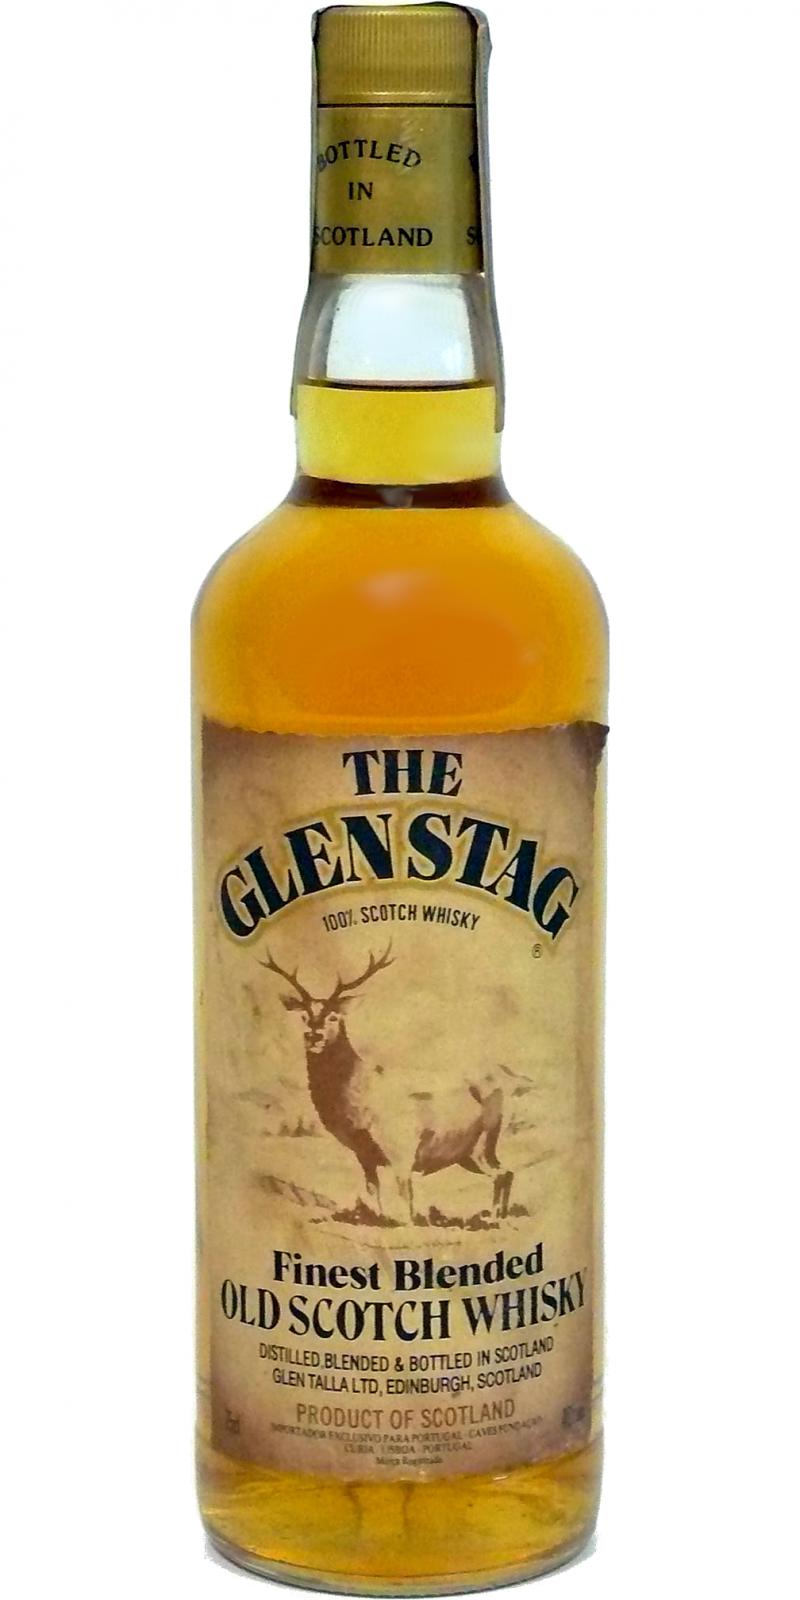 The Glen Stag Finest Blended Old Scotch Whisky